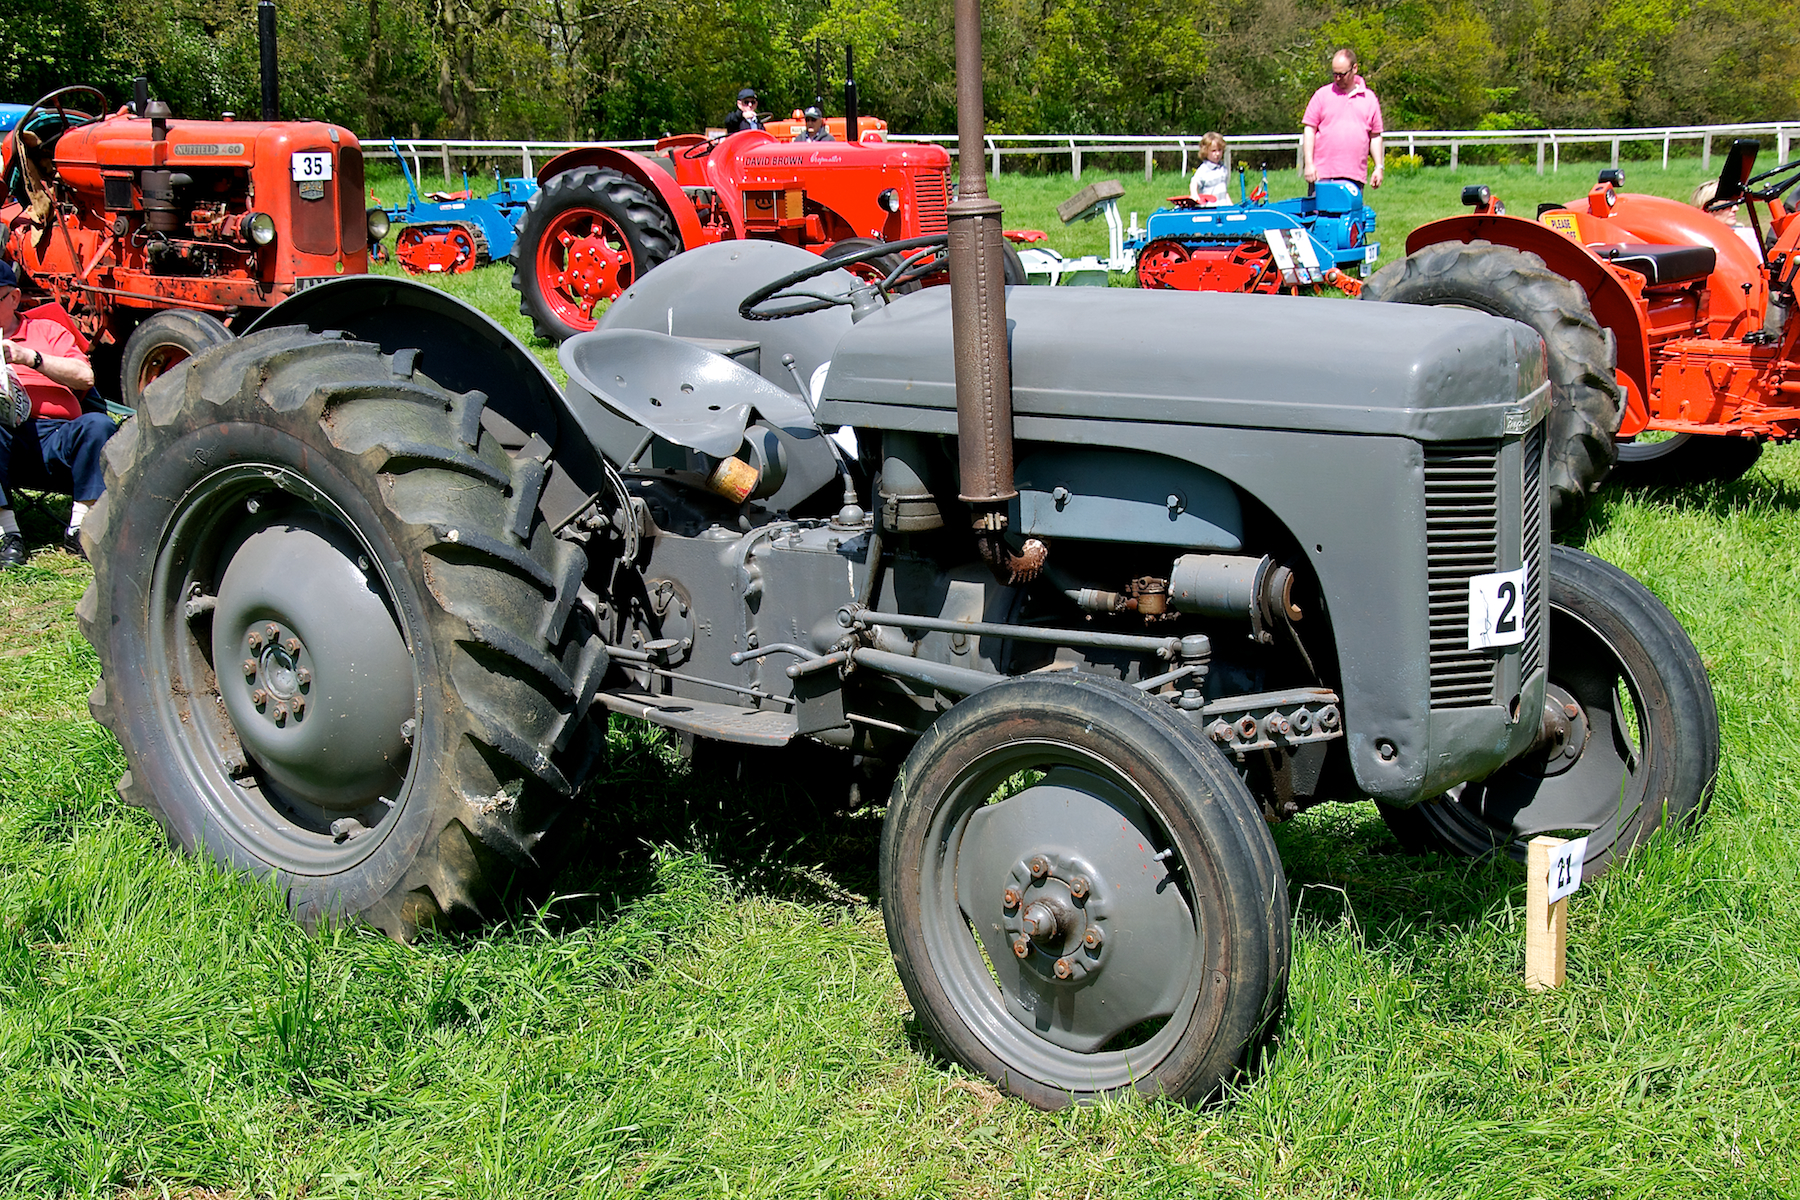 antique farm tractors are parked in a grassy field